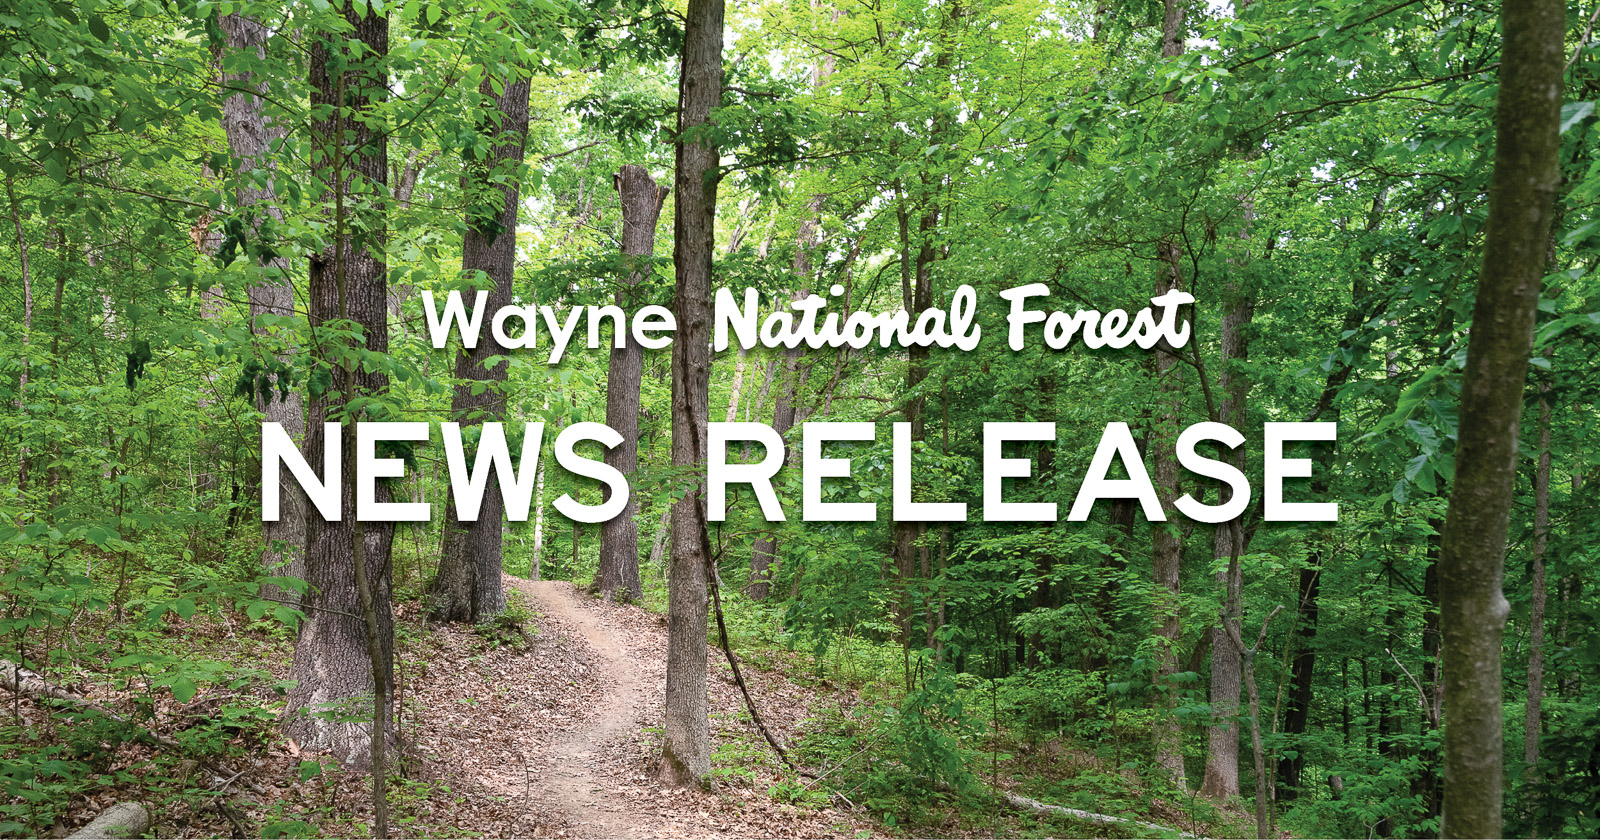 Text over a picture of the forest says Wayne National Forest News release.